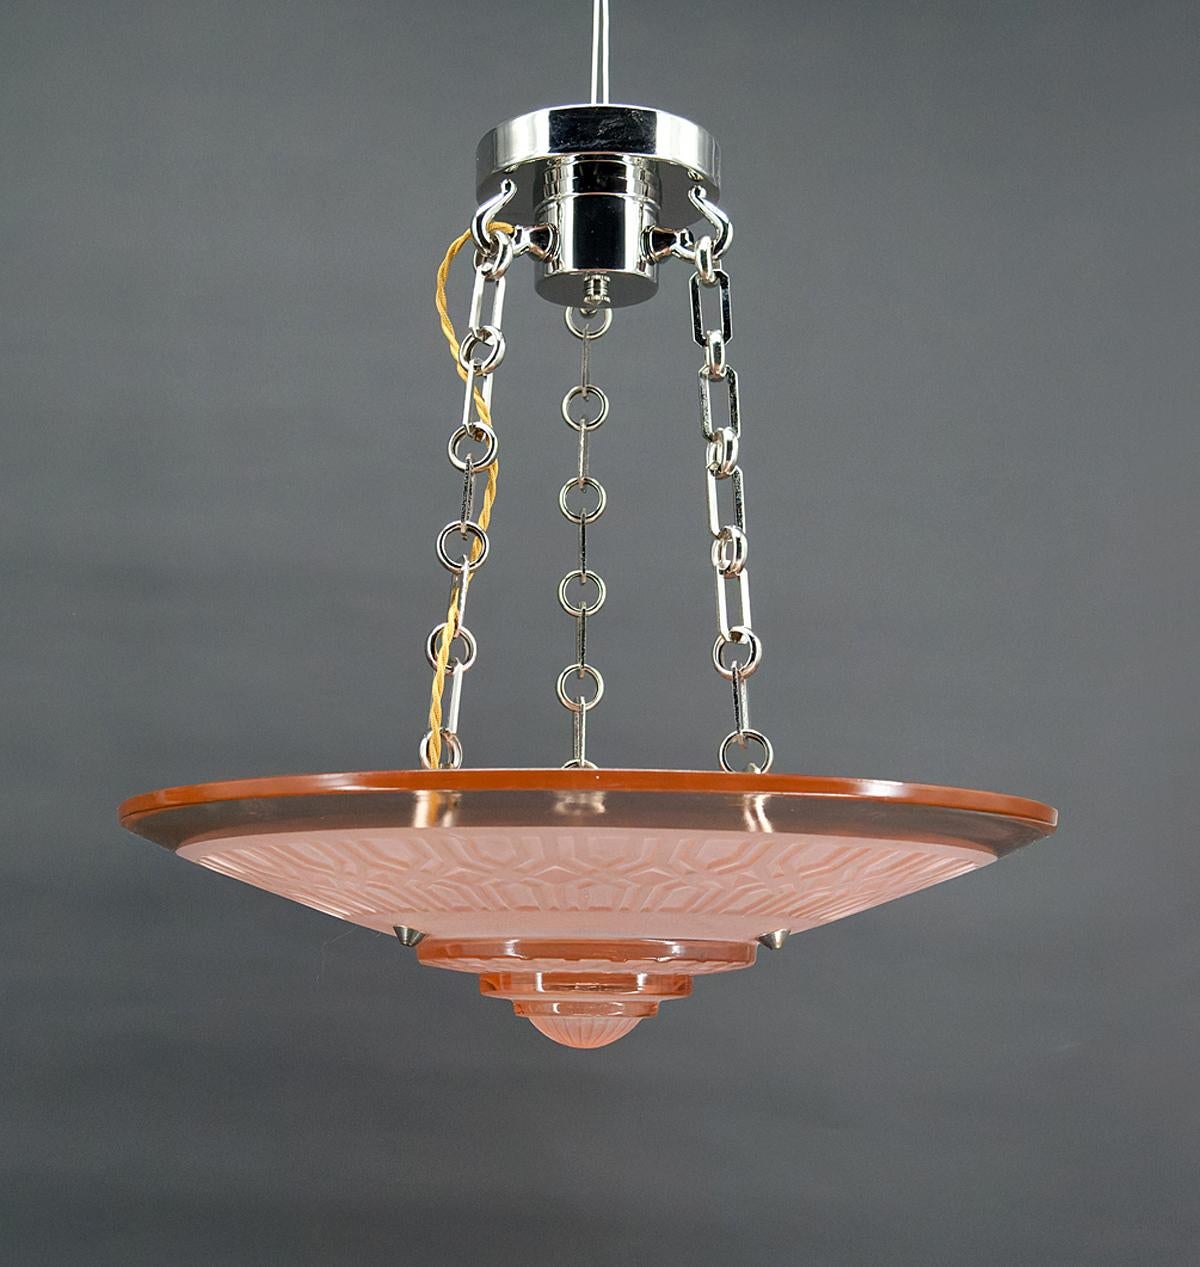 Modernist Art Deco chandelier/suspension, in acid-etched pink glass and chrome/nickel-plated bronze frame.
Sign.
By Henry Petitot (1914-1938).

France, Circa 1935

In excellent condition. New electricity.

Dimensions:
Height 48 cm
Diameter 45 cm